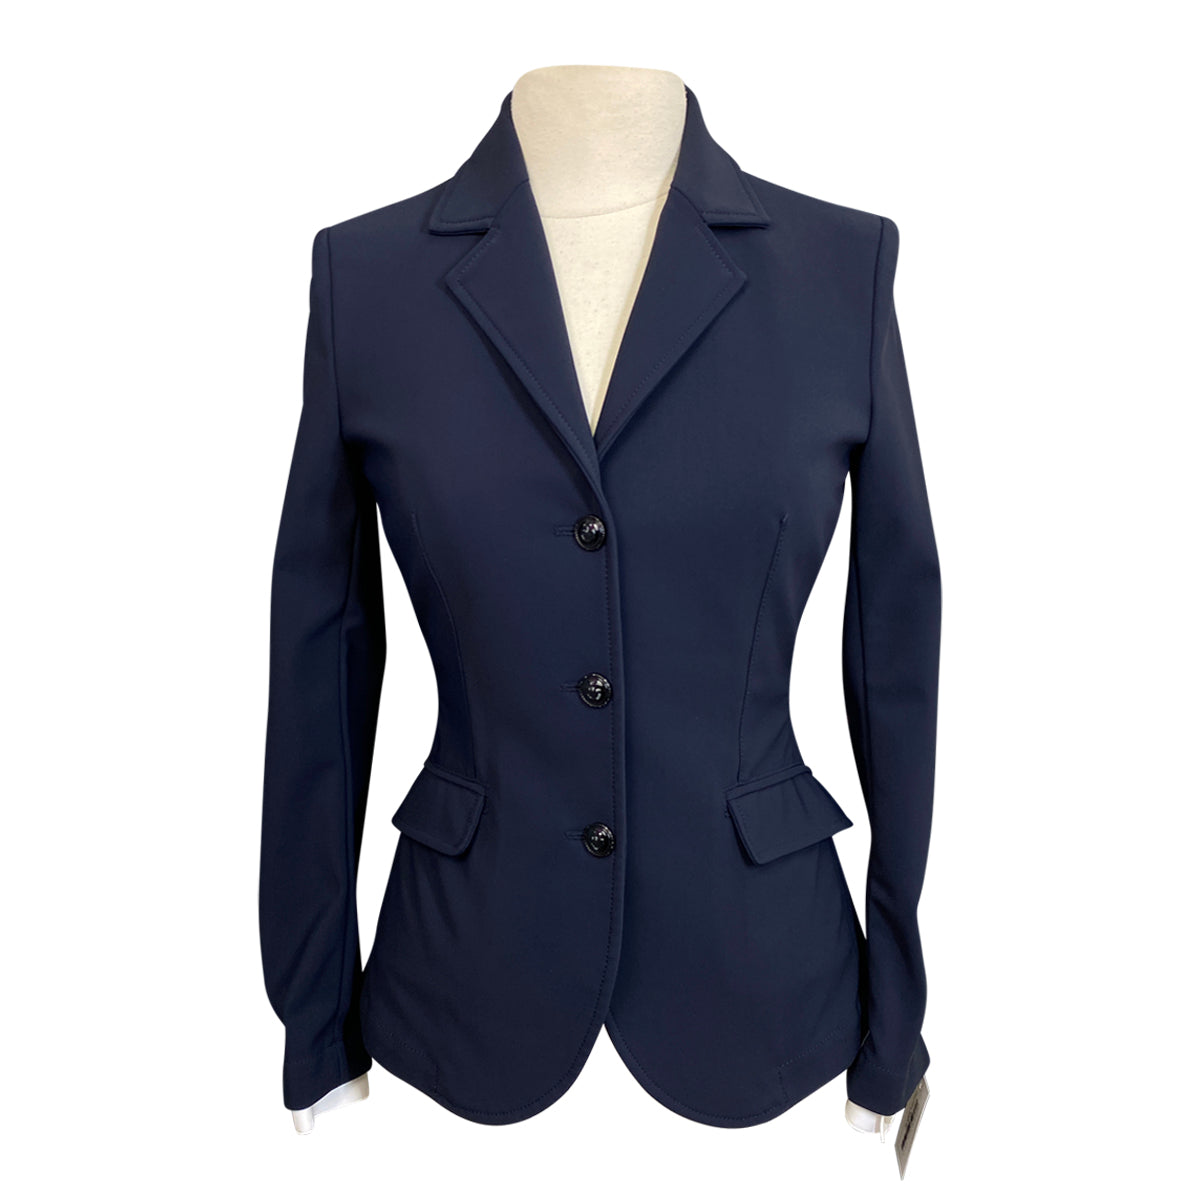 Cavalleria Toscana 'American' Competition Jacket in Navy